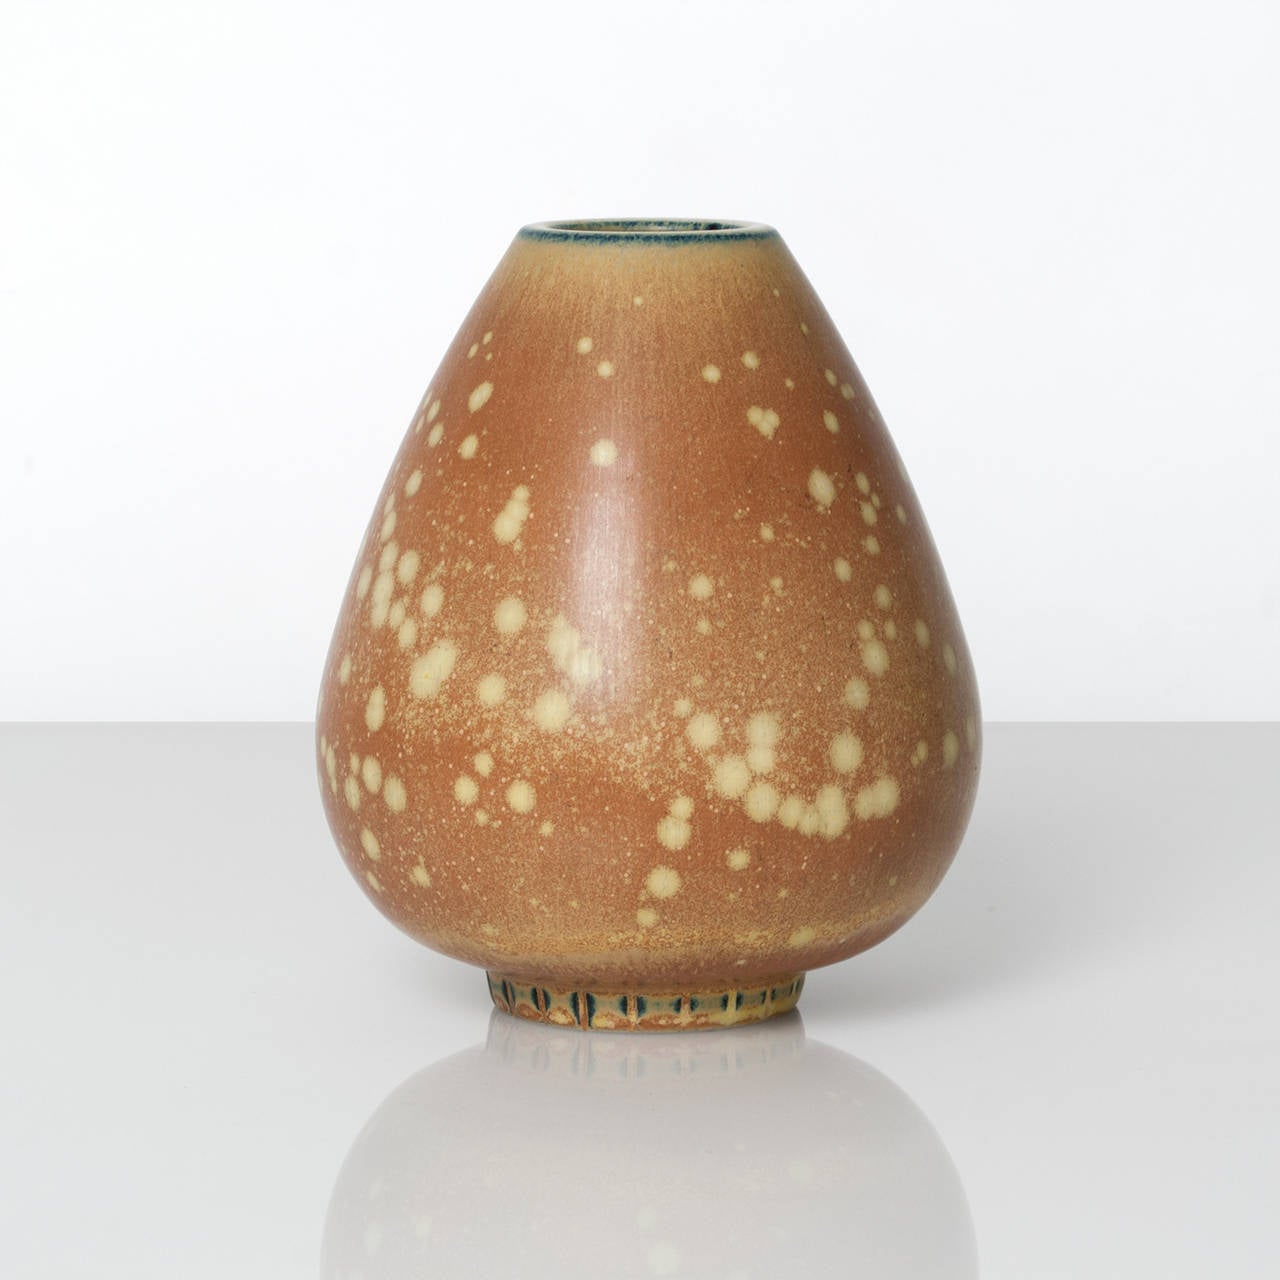 Swedish midcentury ceramic vase with a beautiful spotted glaze and a detailed foot by Gunnar Nylund for Rorstrand, circa 1940s. 
Height 6.5